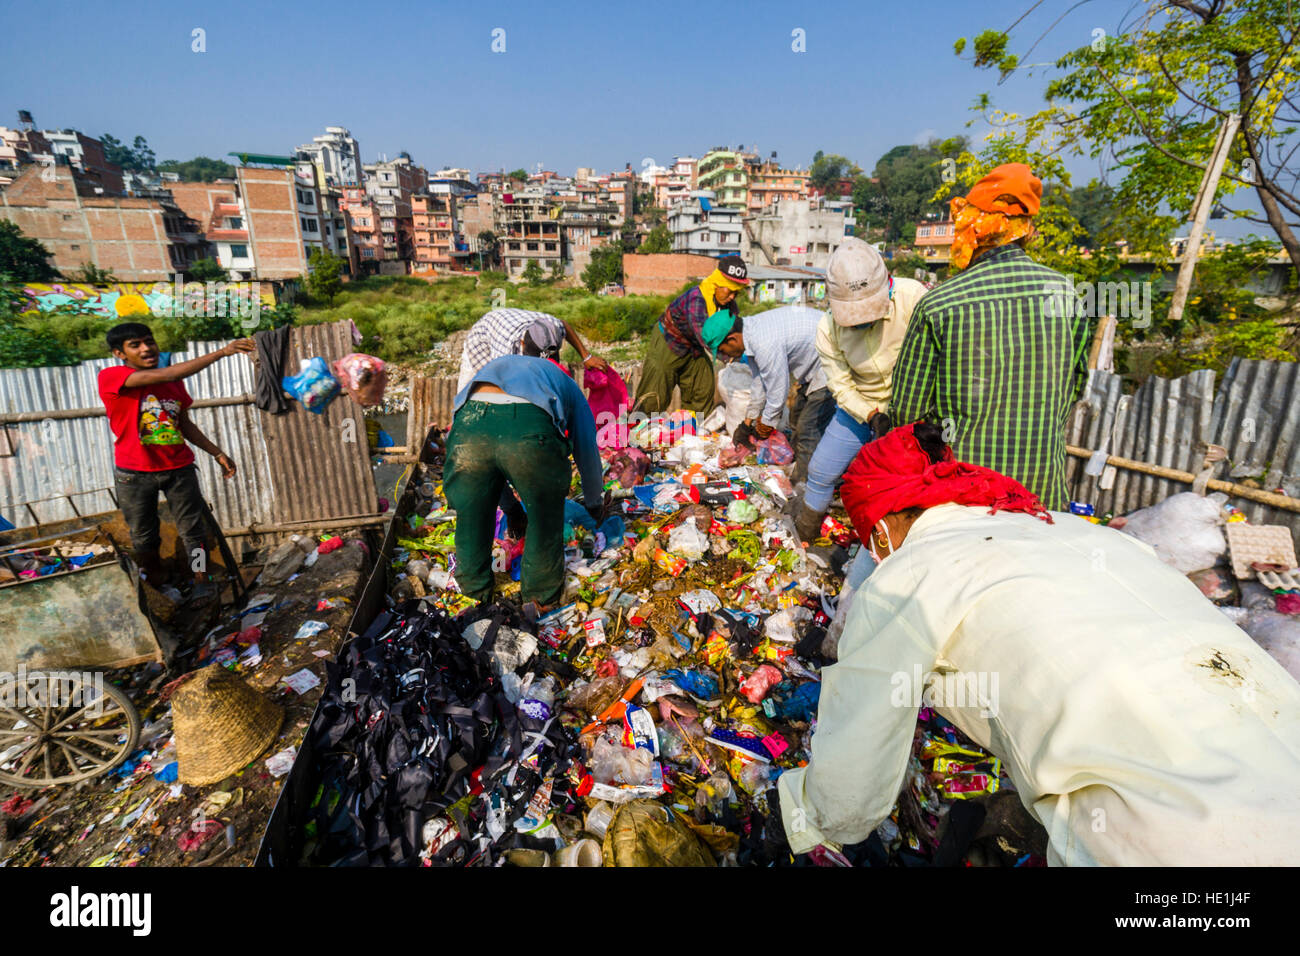 People are collecting garbage in the city, loading it on trucks and transporting it to a garbage dump outside the town Stock Photo